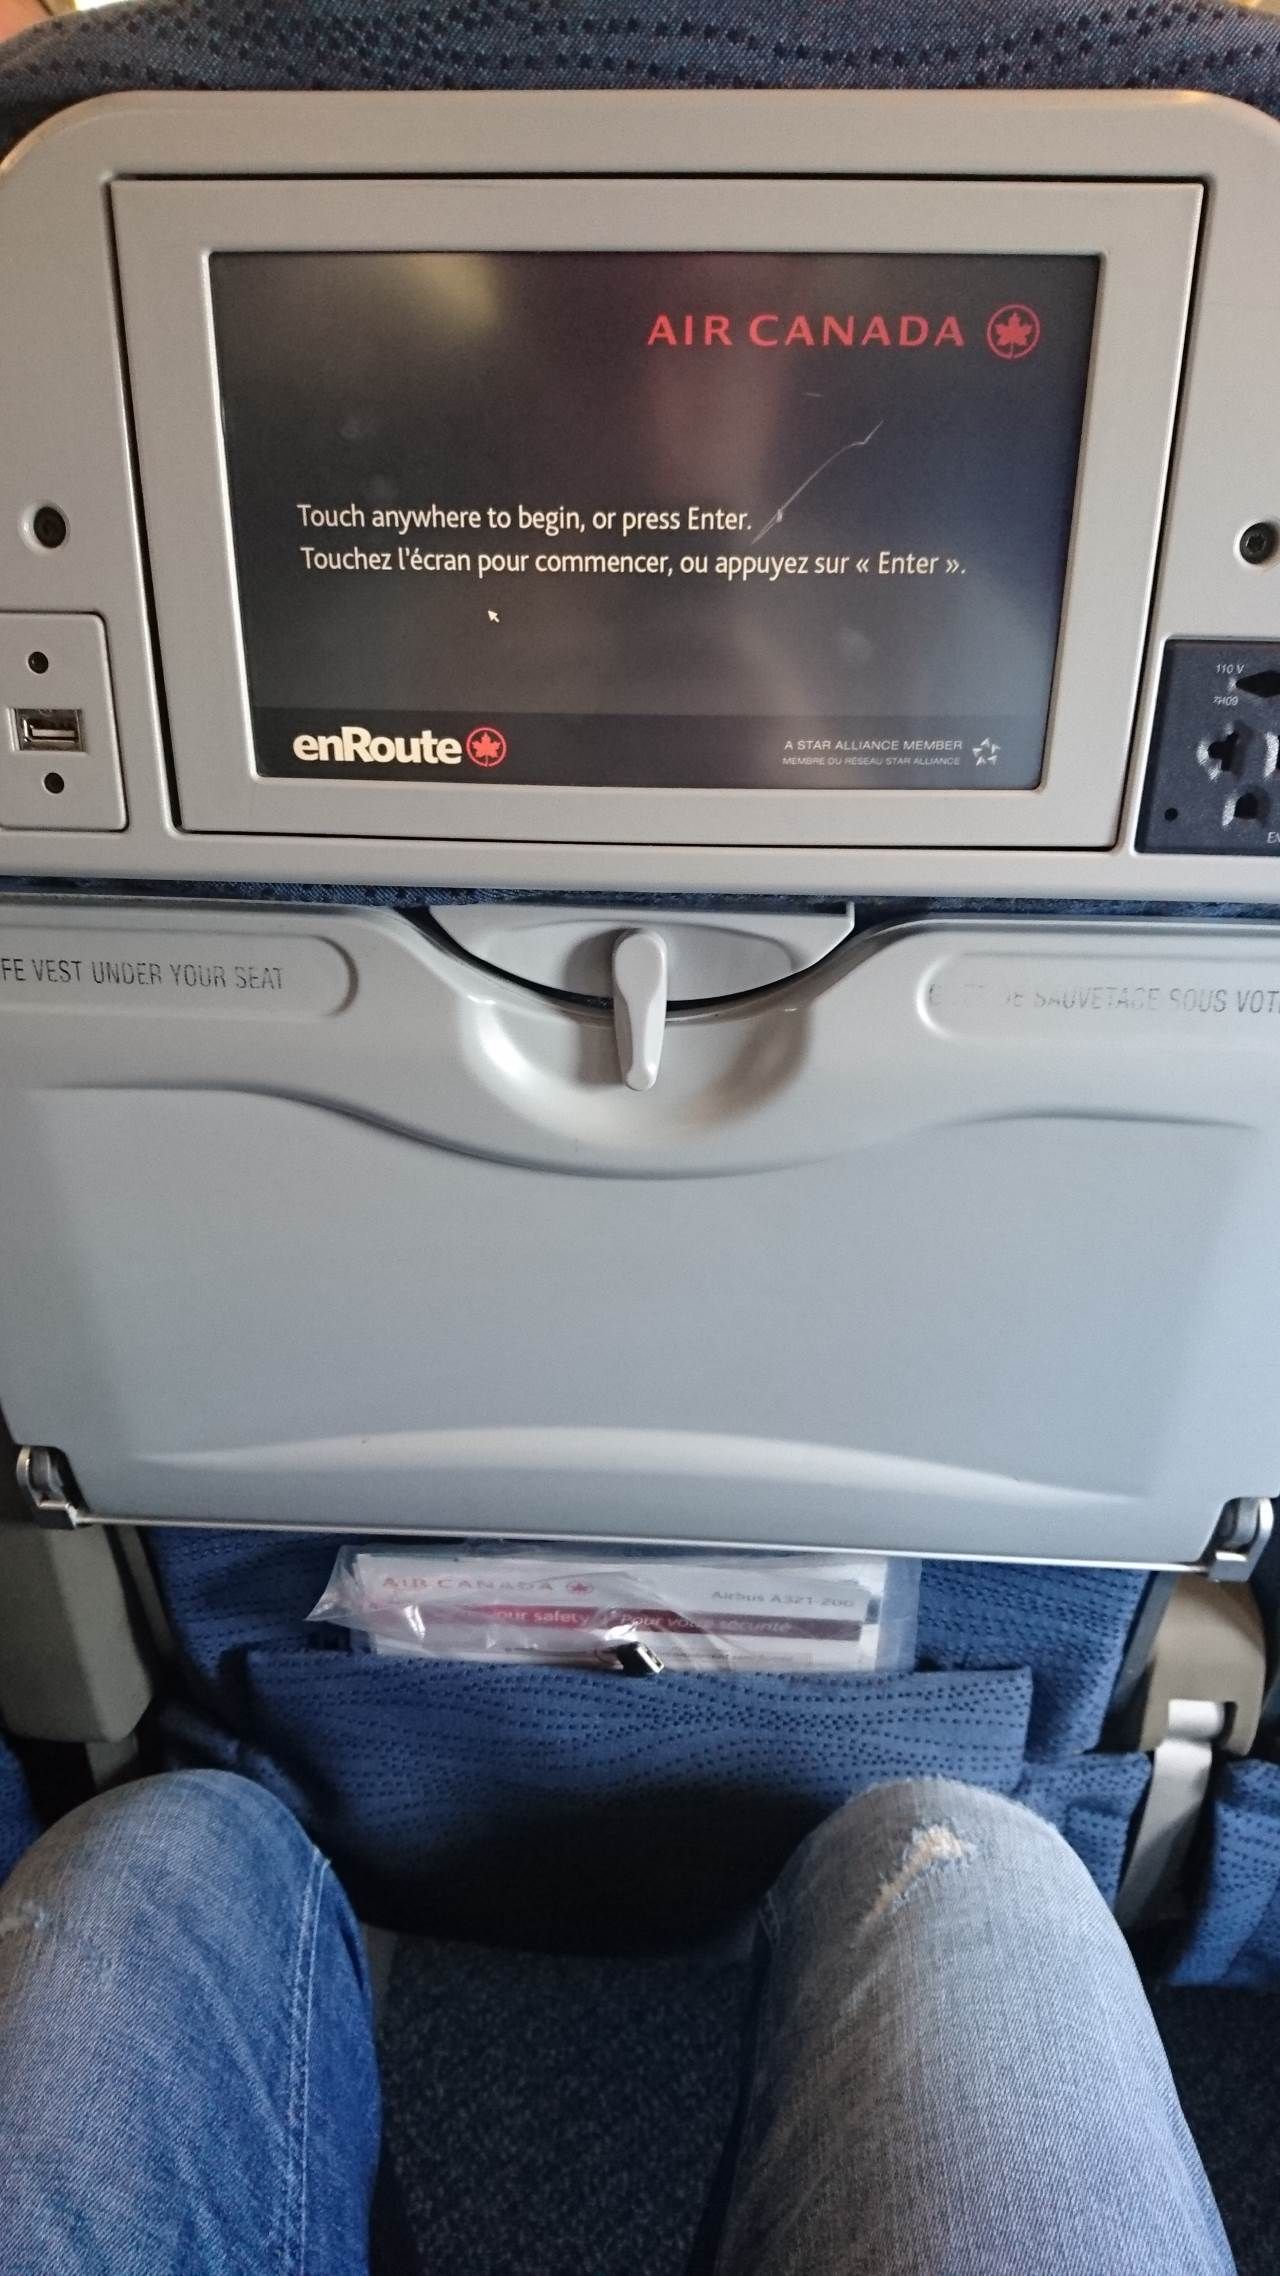 Air Canada Airbus A321 200 Economy Class cabin standard seats pitch legroom with IFE system